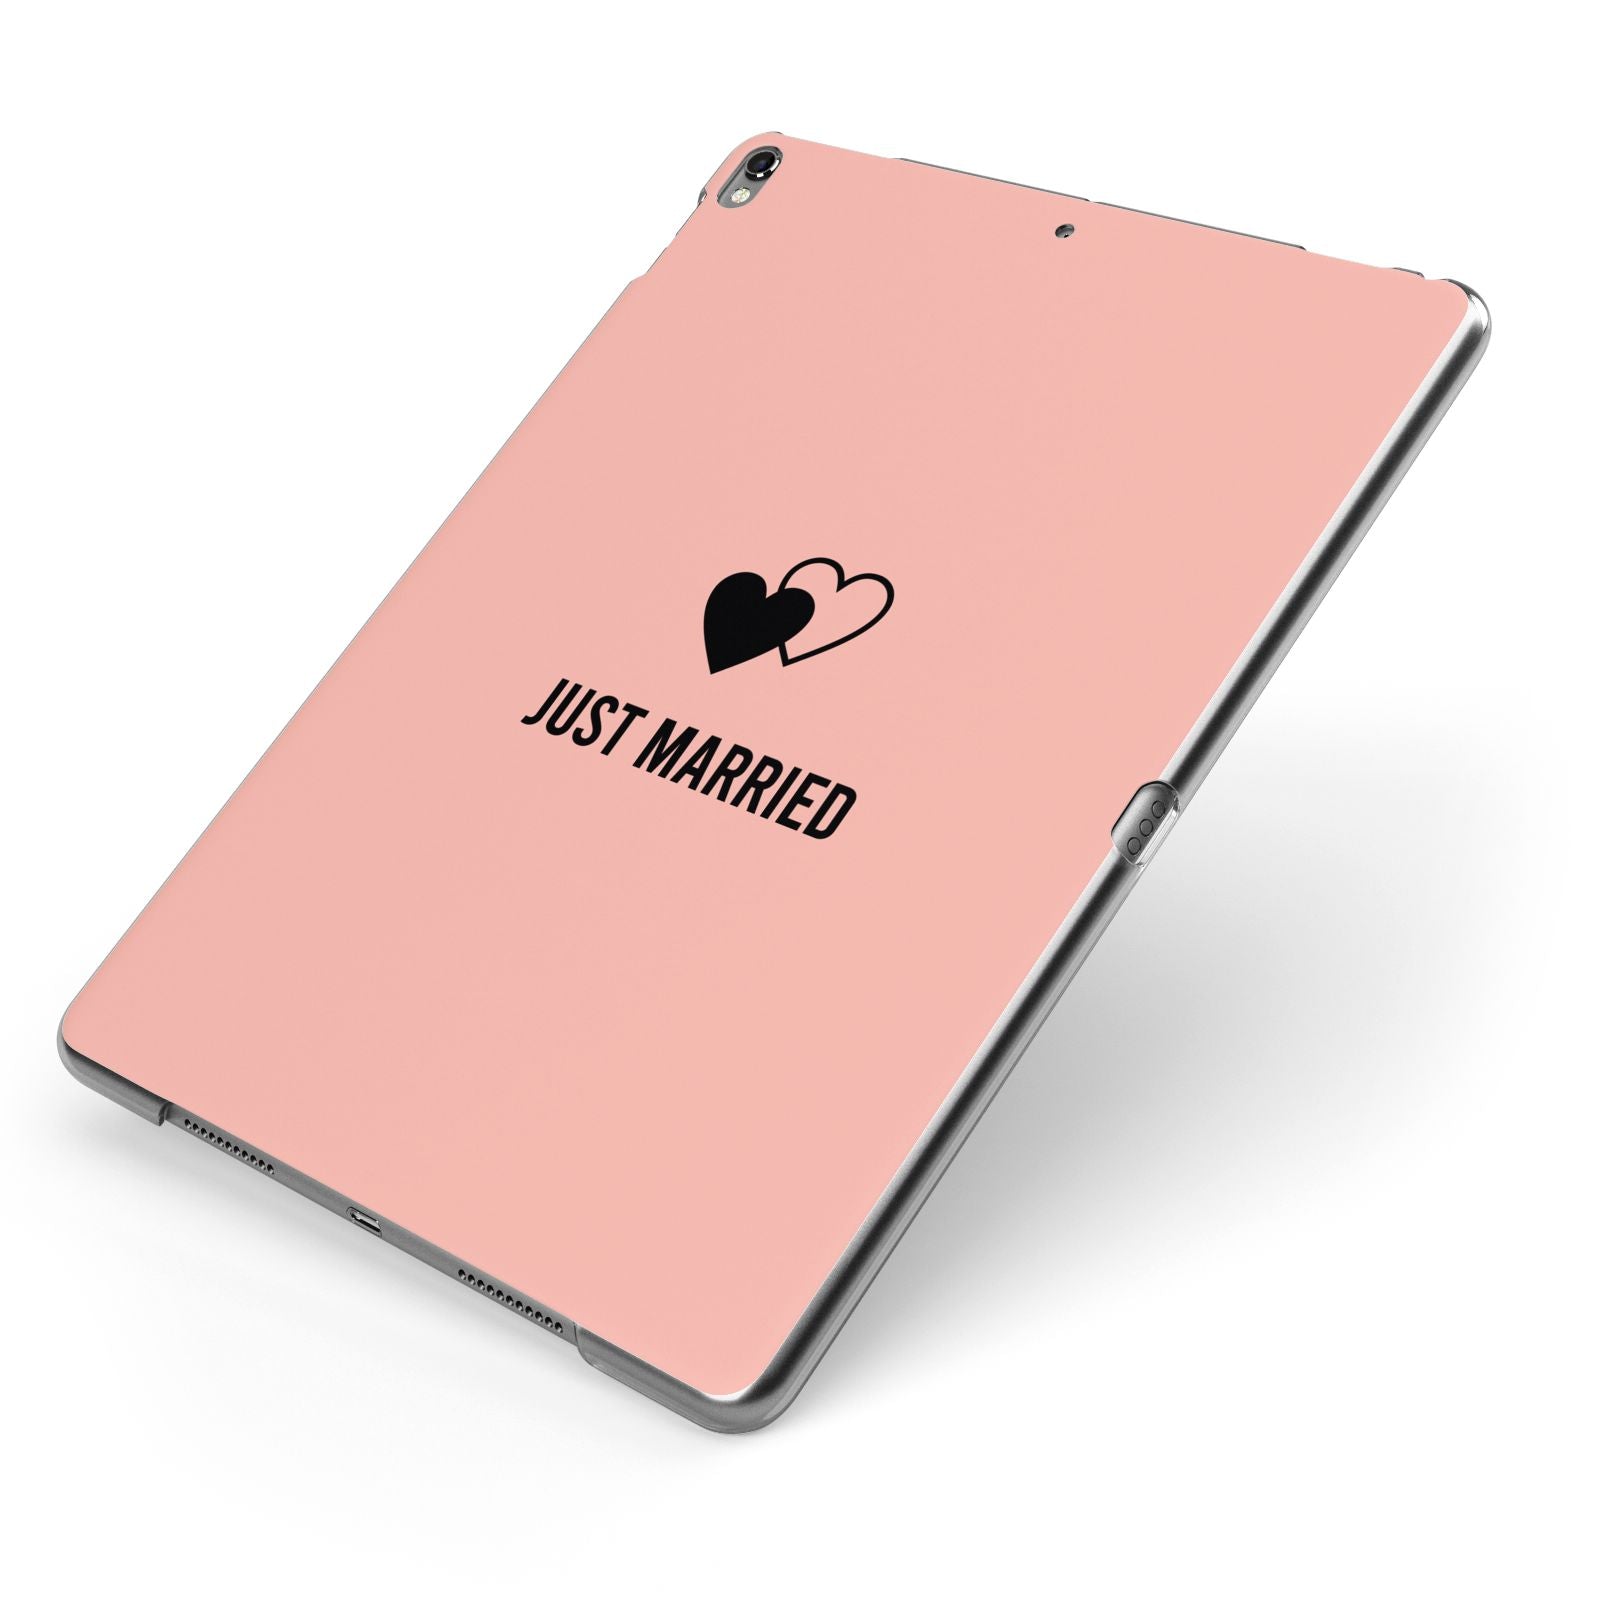 Just Married Apple iPad Case on Grey iPad Side View